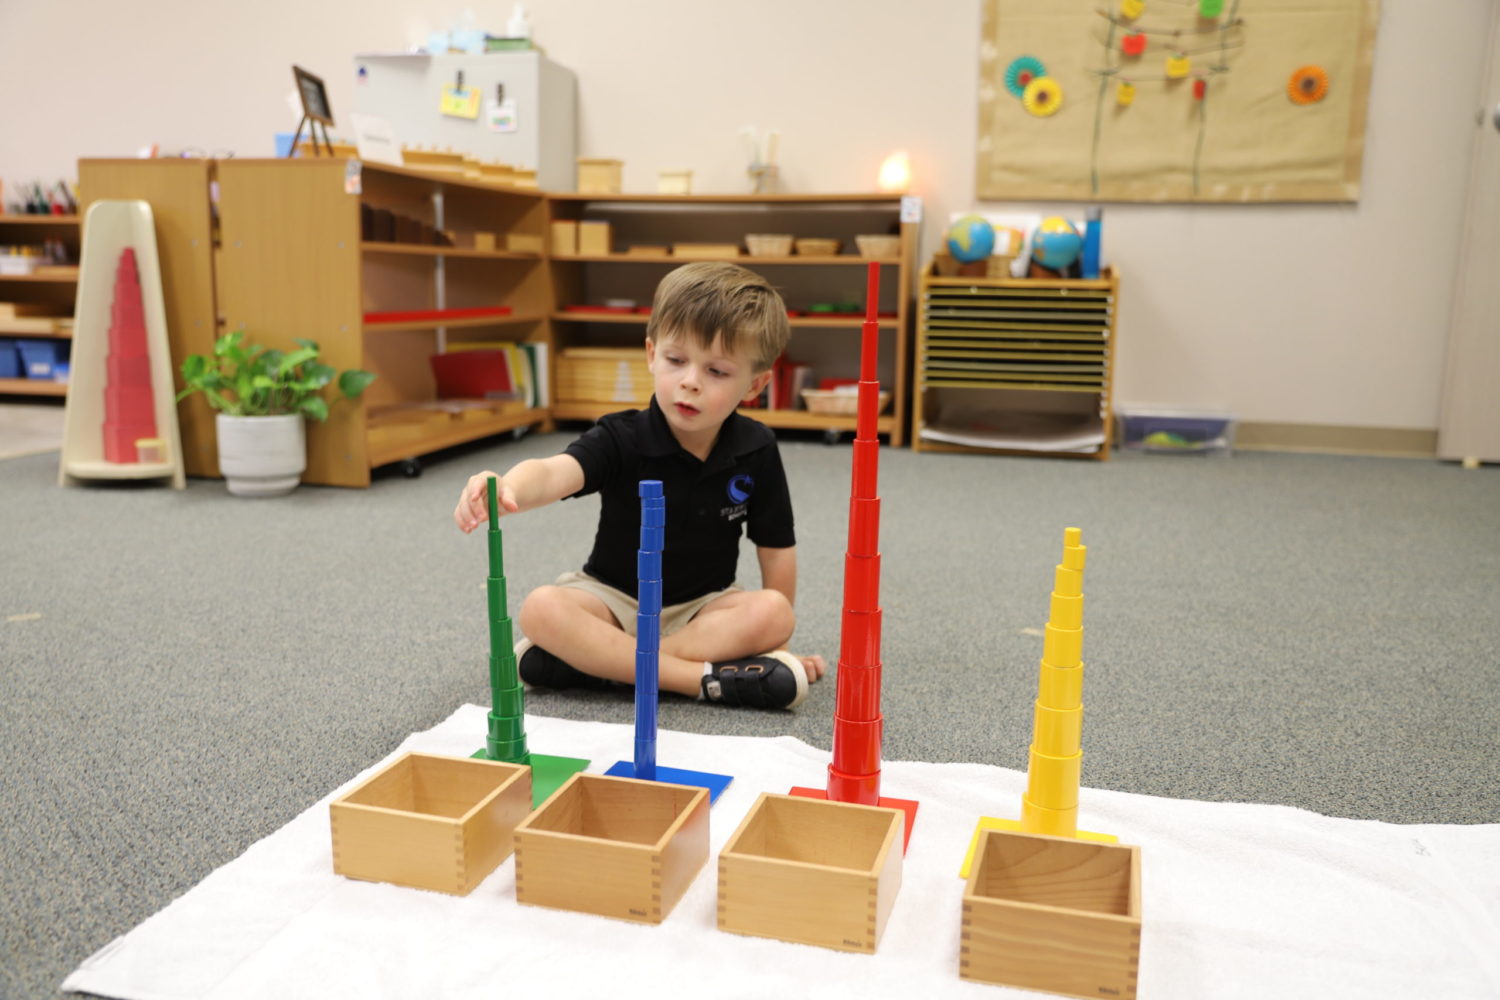 Primary student working with knobbles cylinders